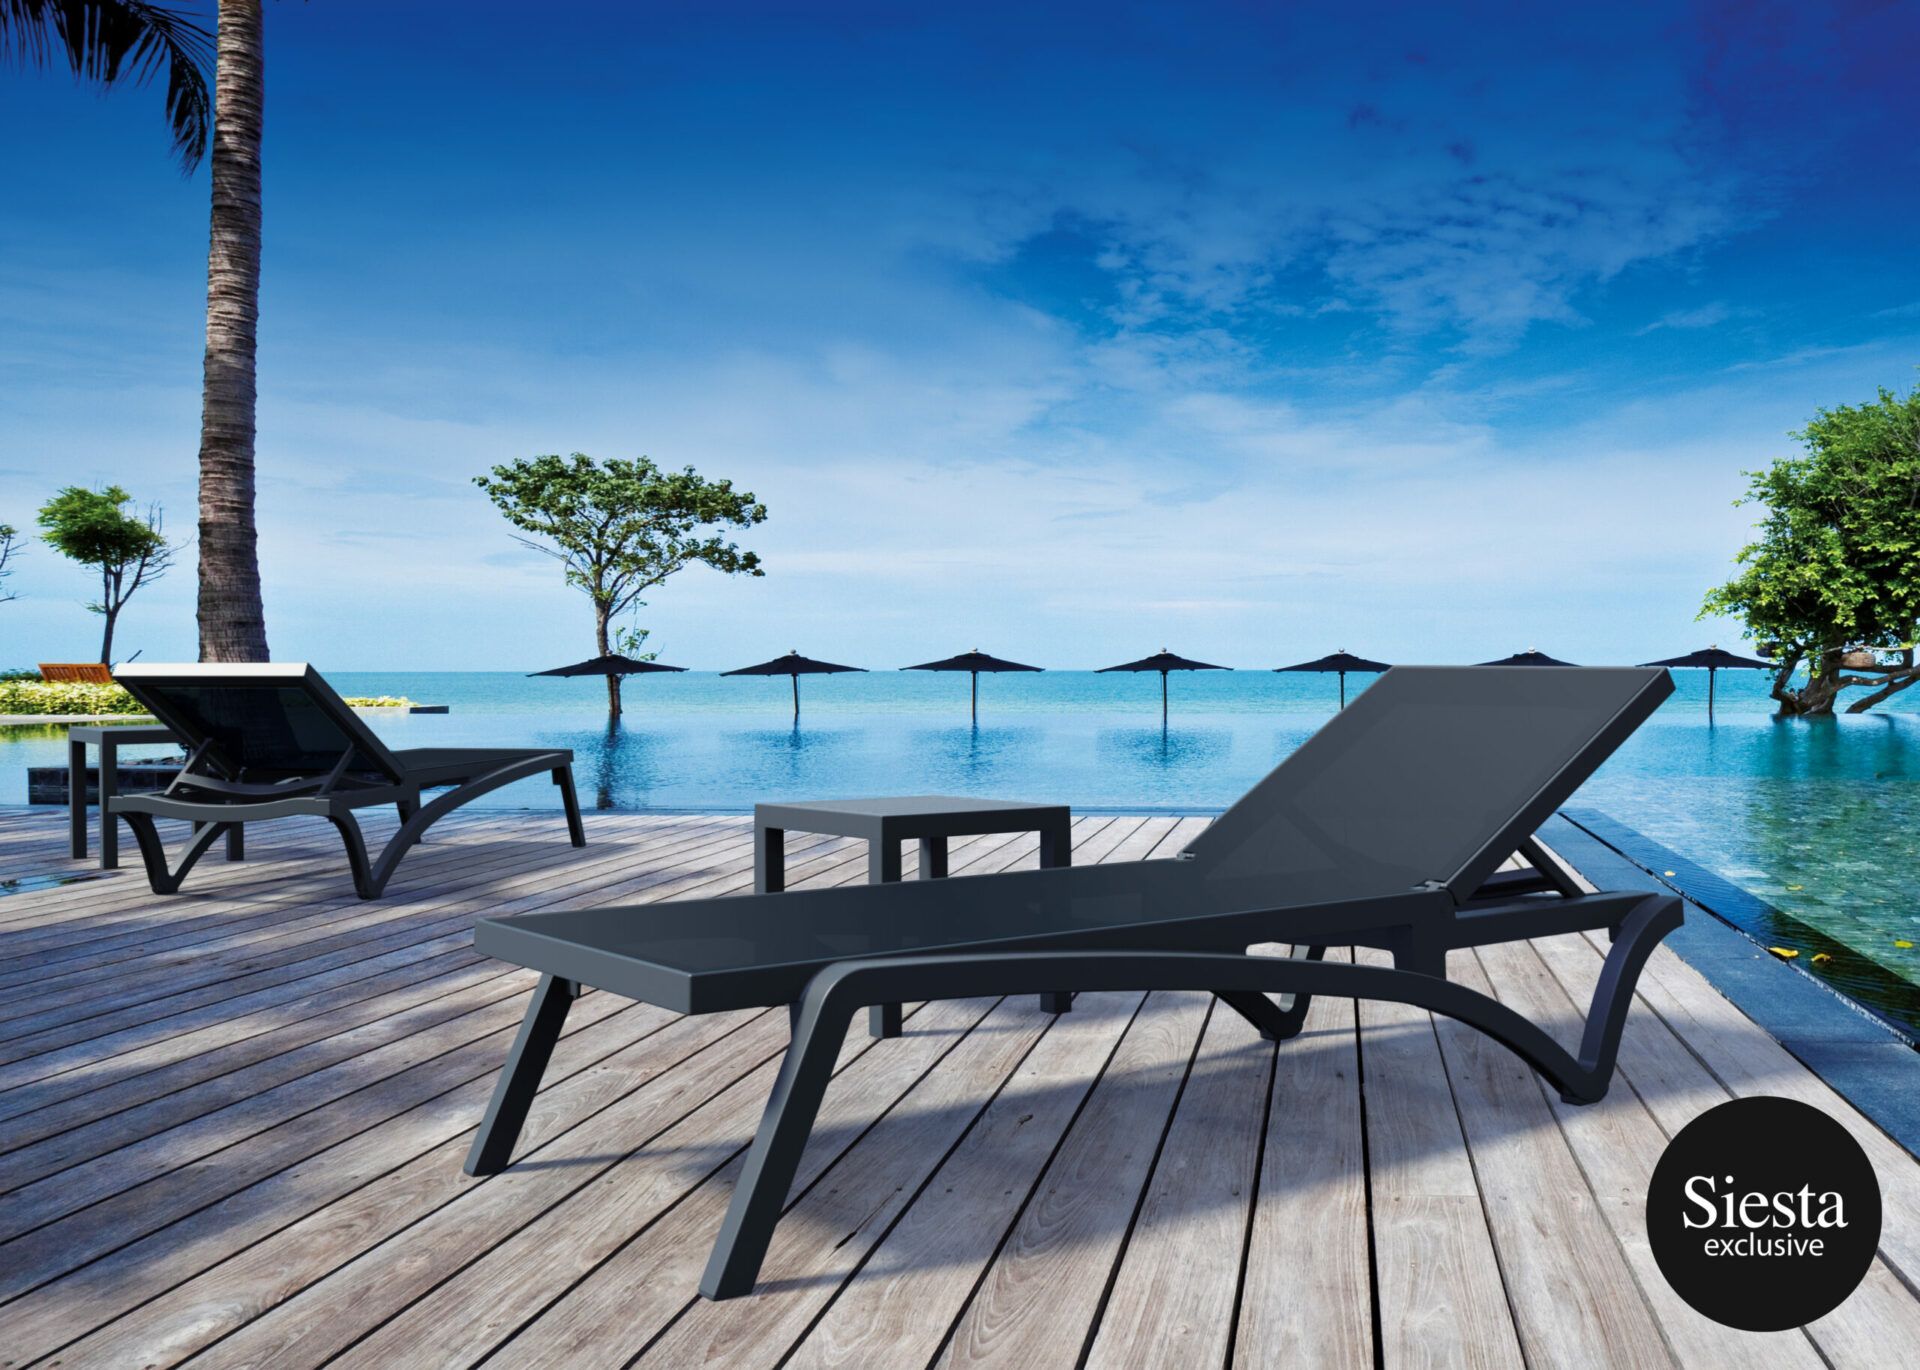 Pacific Sunlounger/Ocean Side Table 4 Pc Package - Blue/White